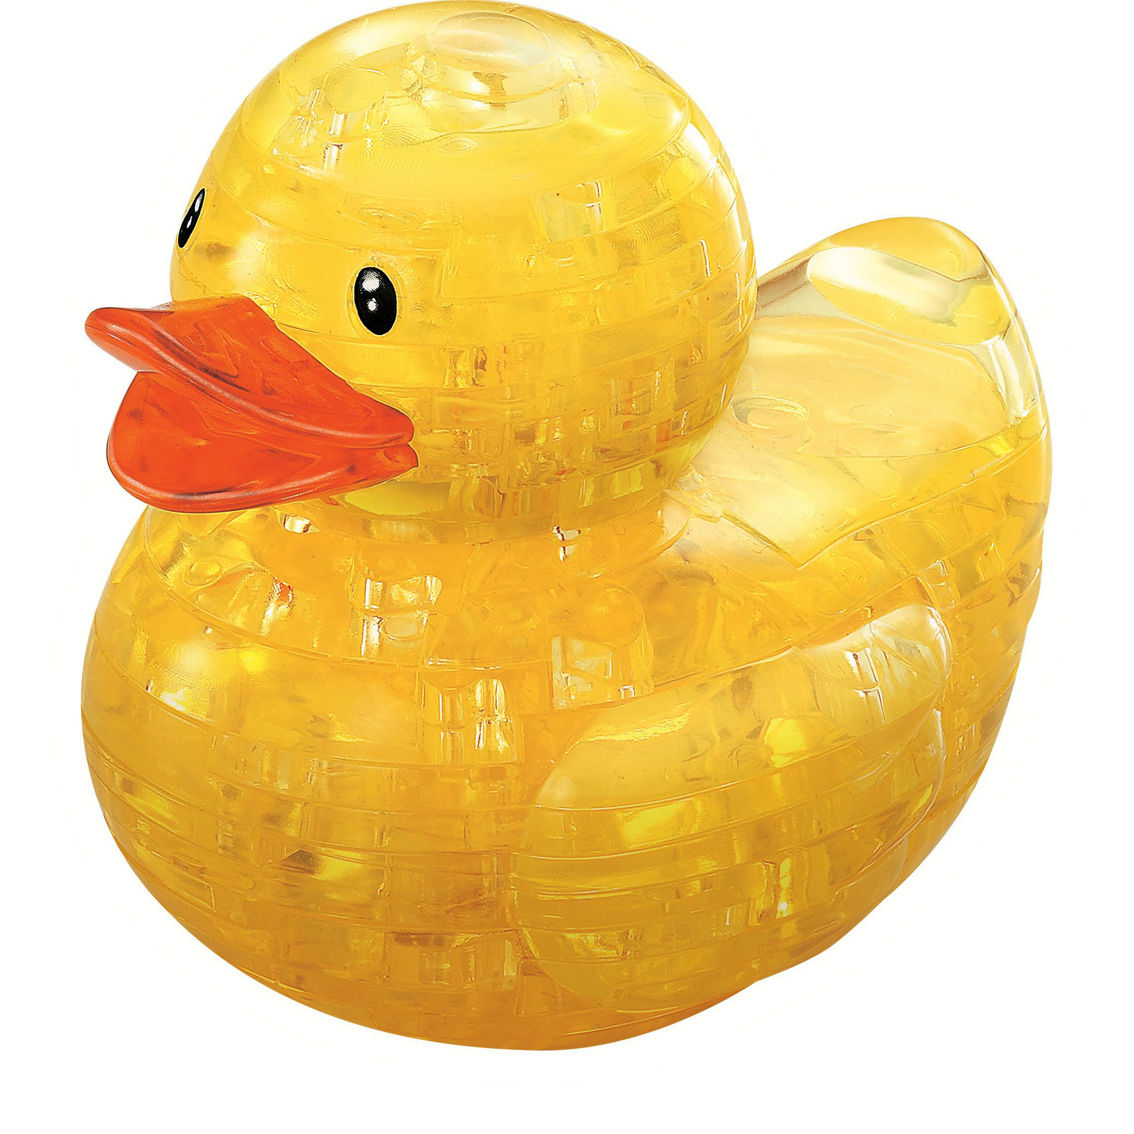 BePuzzled 3D Crystal Puzzle - Rubber Duck: 43 Pcs - Image 2 of 2